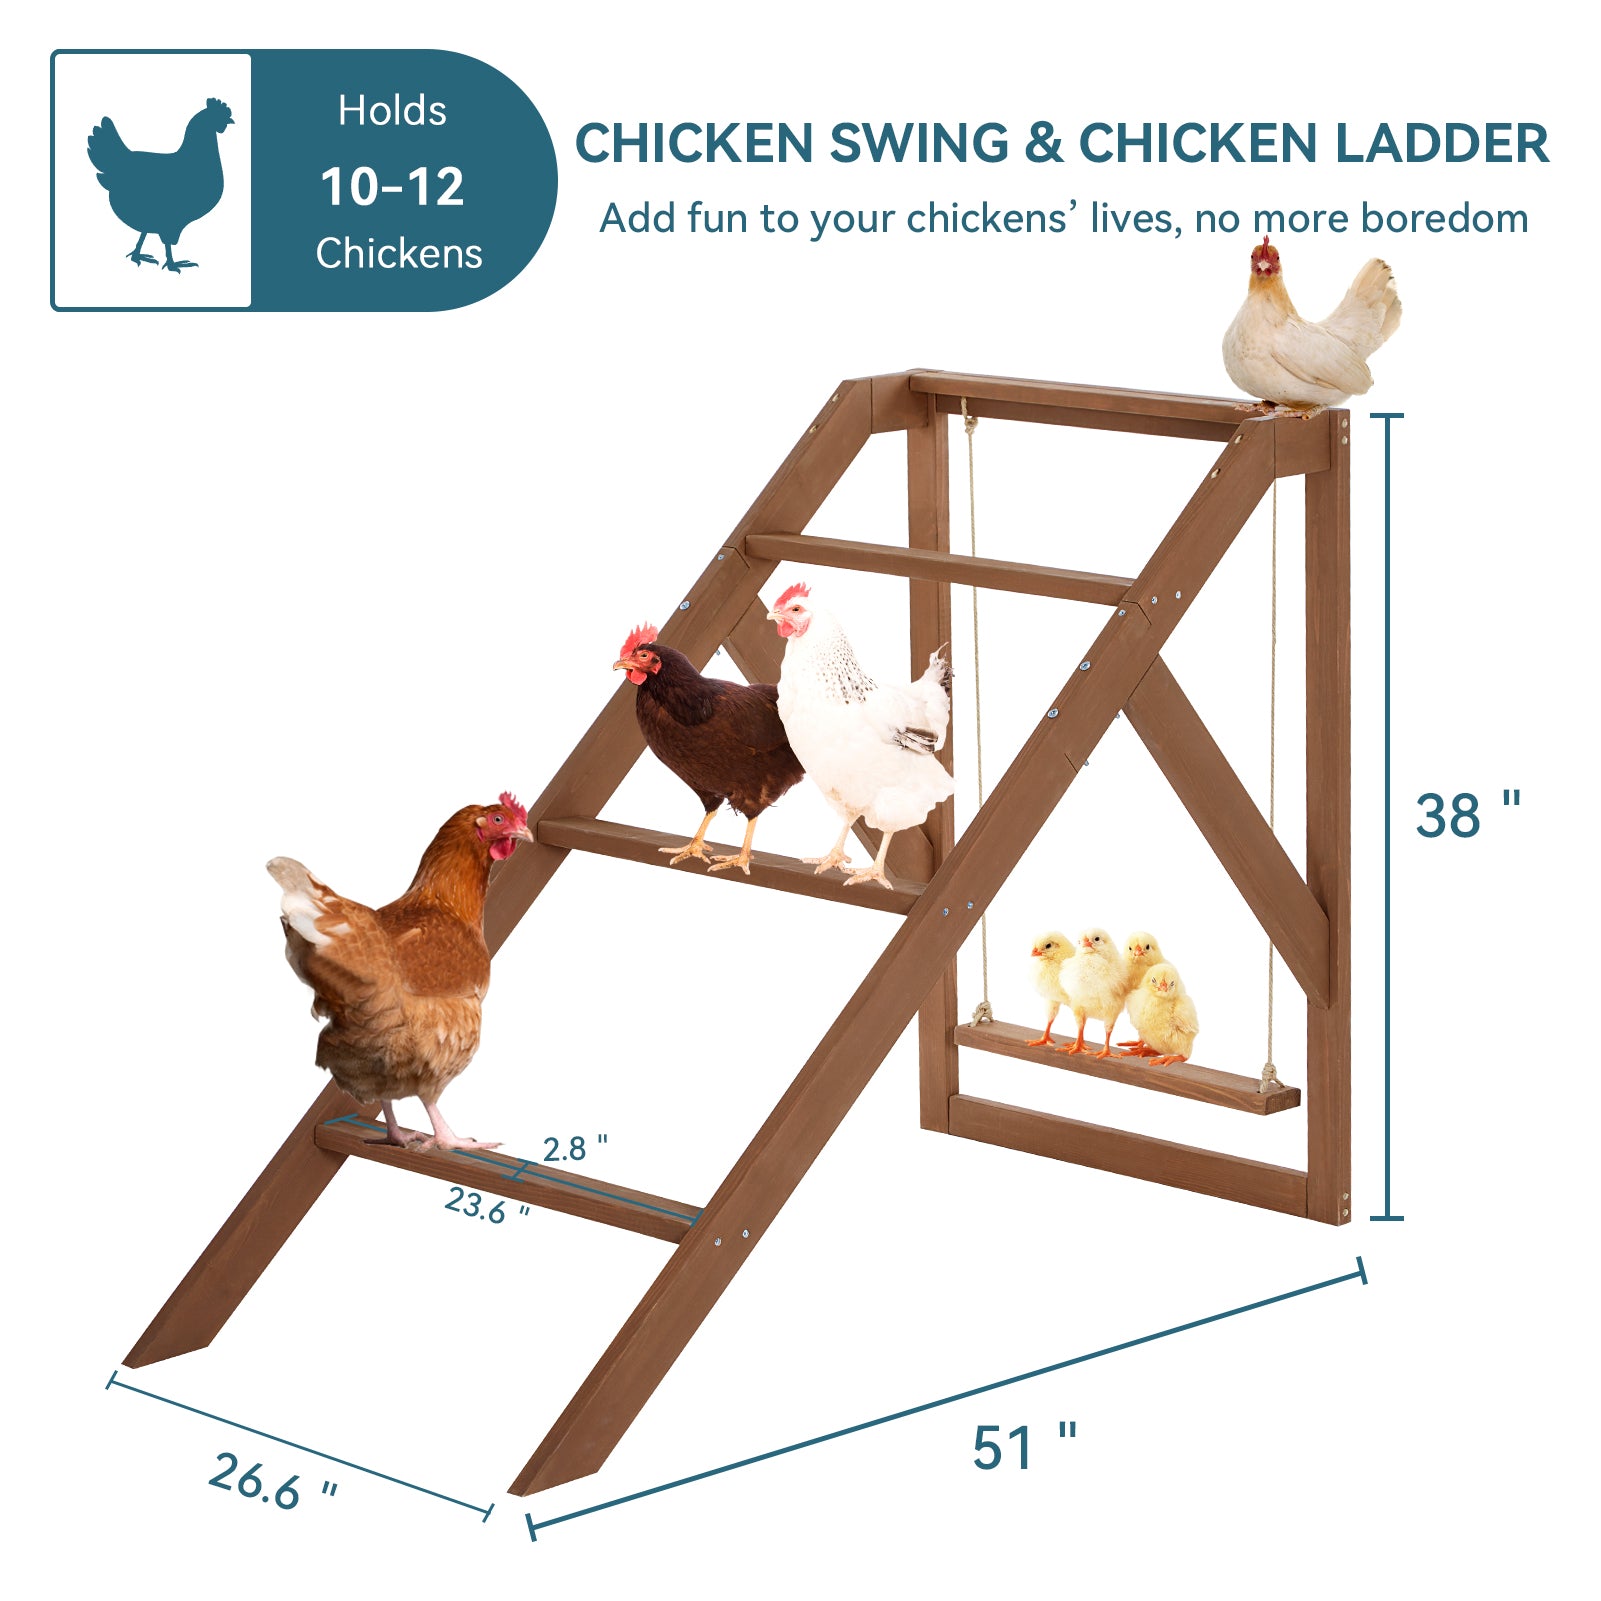 petsfit-chicken-swing-set-for-pets-healthy-happy-4-chicken-perches-with-swing-fit-for-8-10-chicks-chicken-toys-for-coop-accessories-02